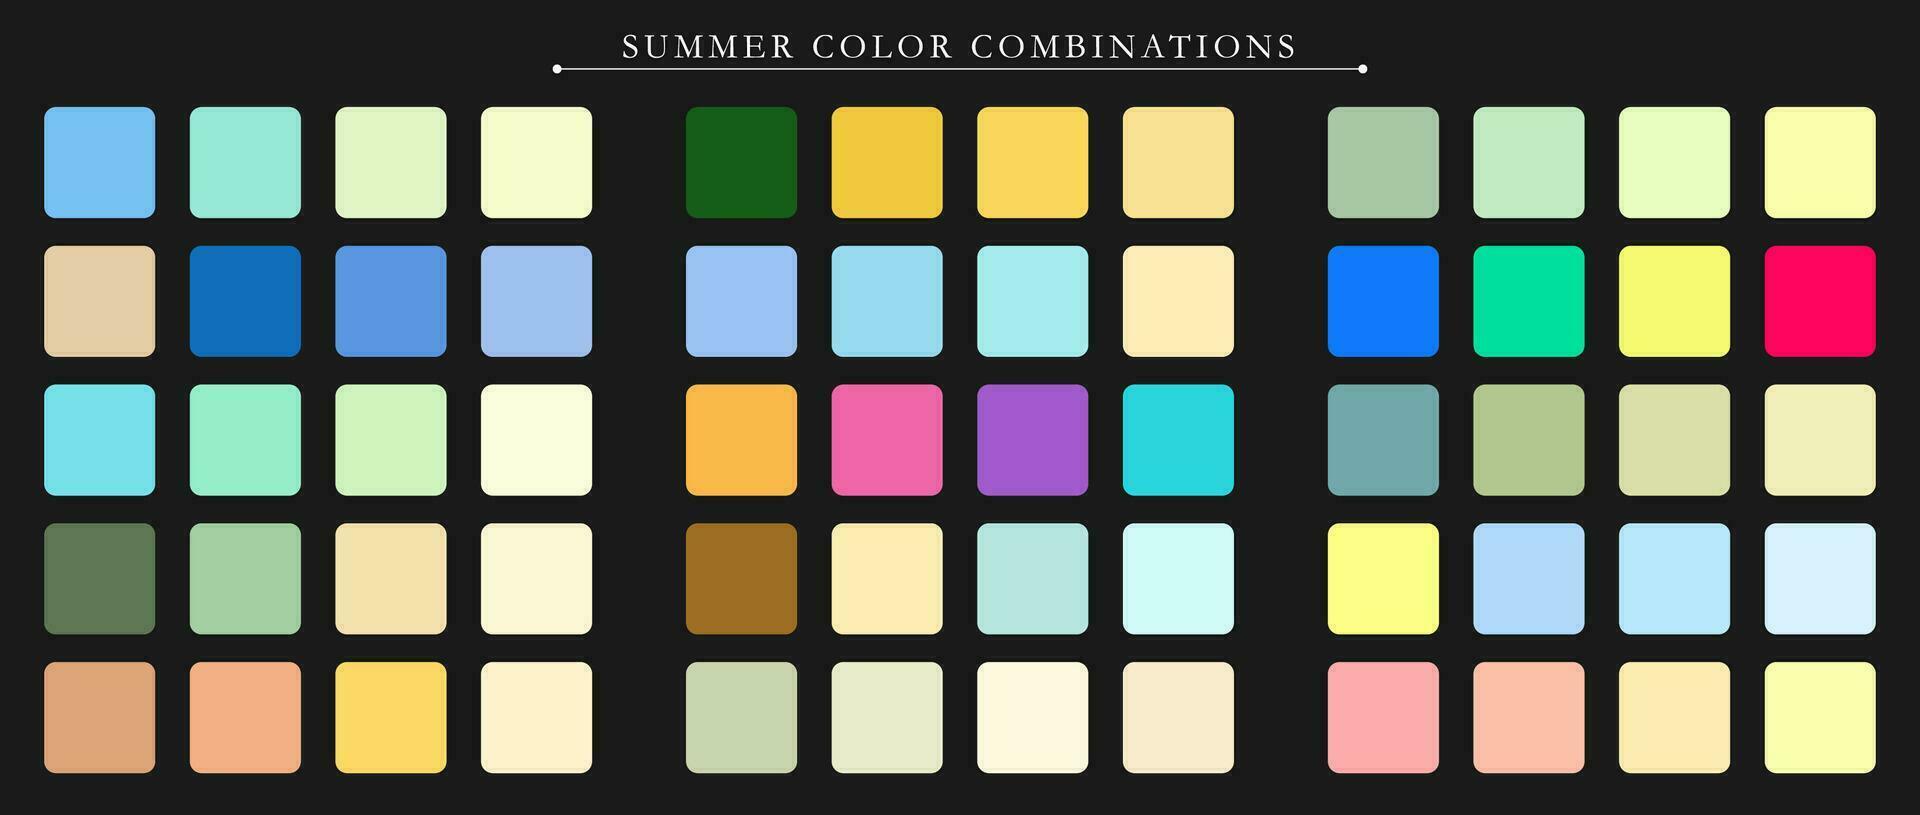 Summer palette. Trend color pallete guide template. An example of a color palette. Forecast of the future color trend. Match color combinations. Vector graphics. Eps 10.